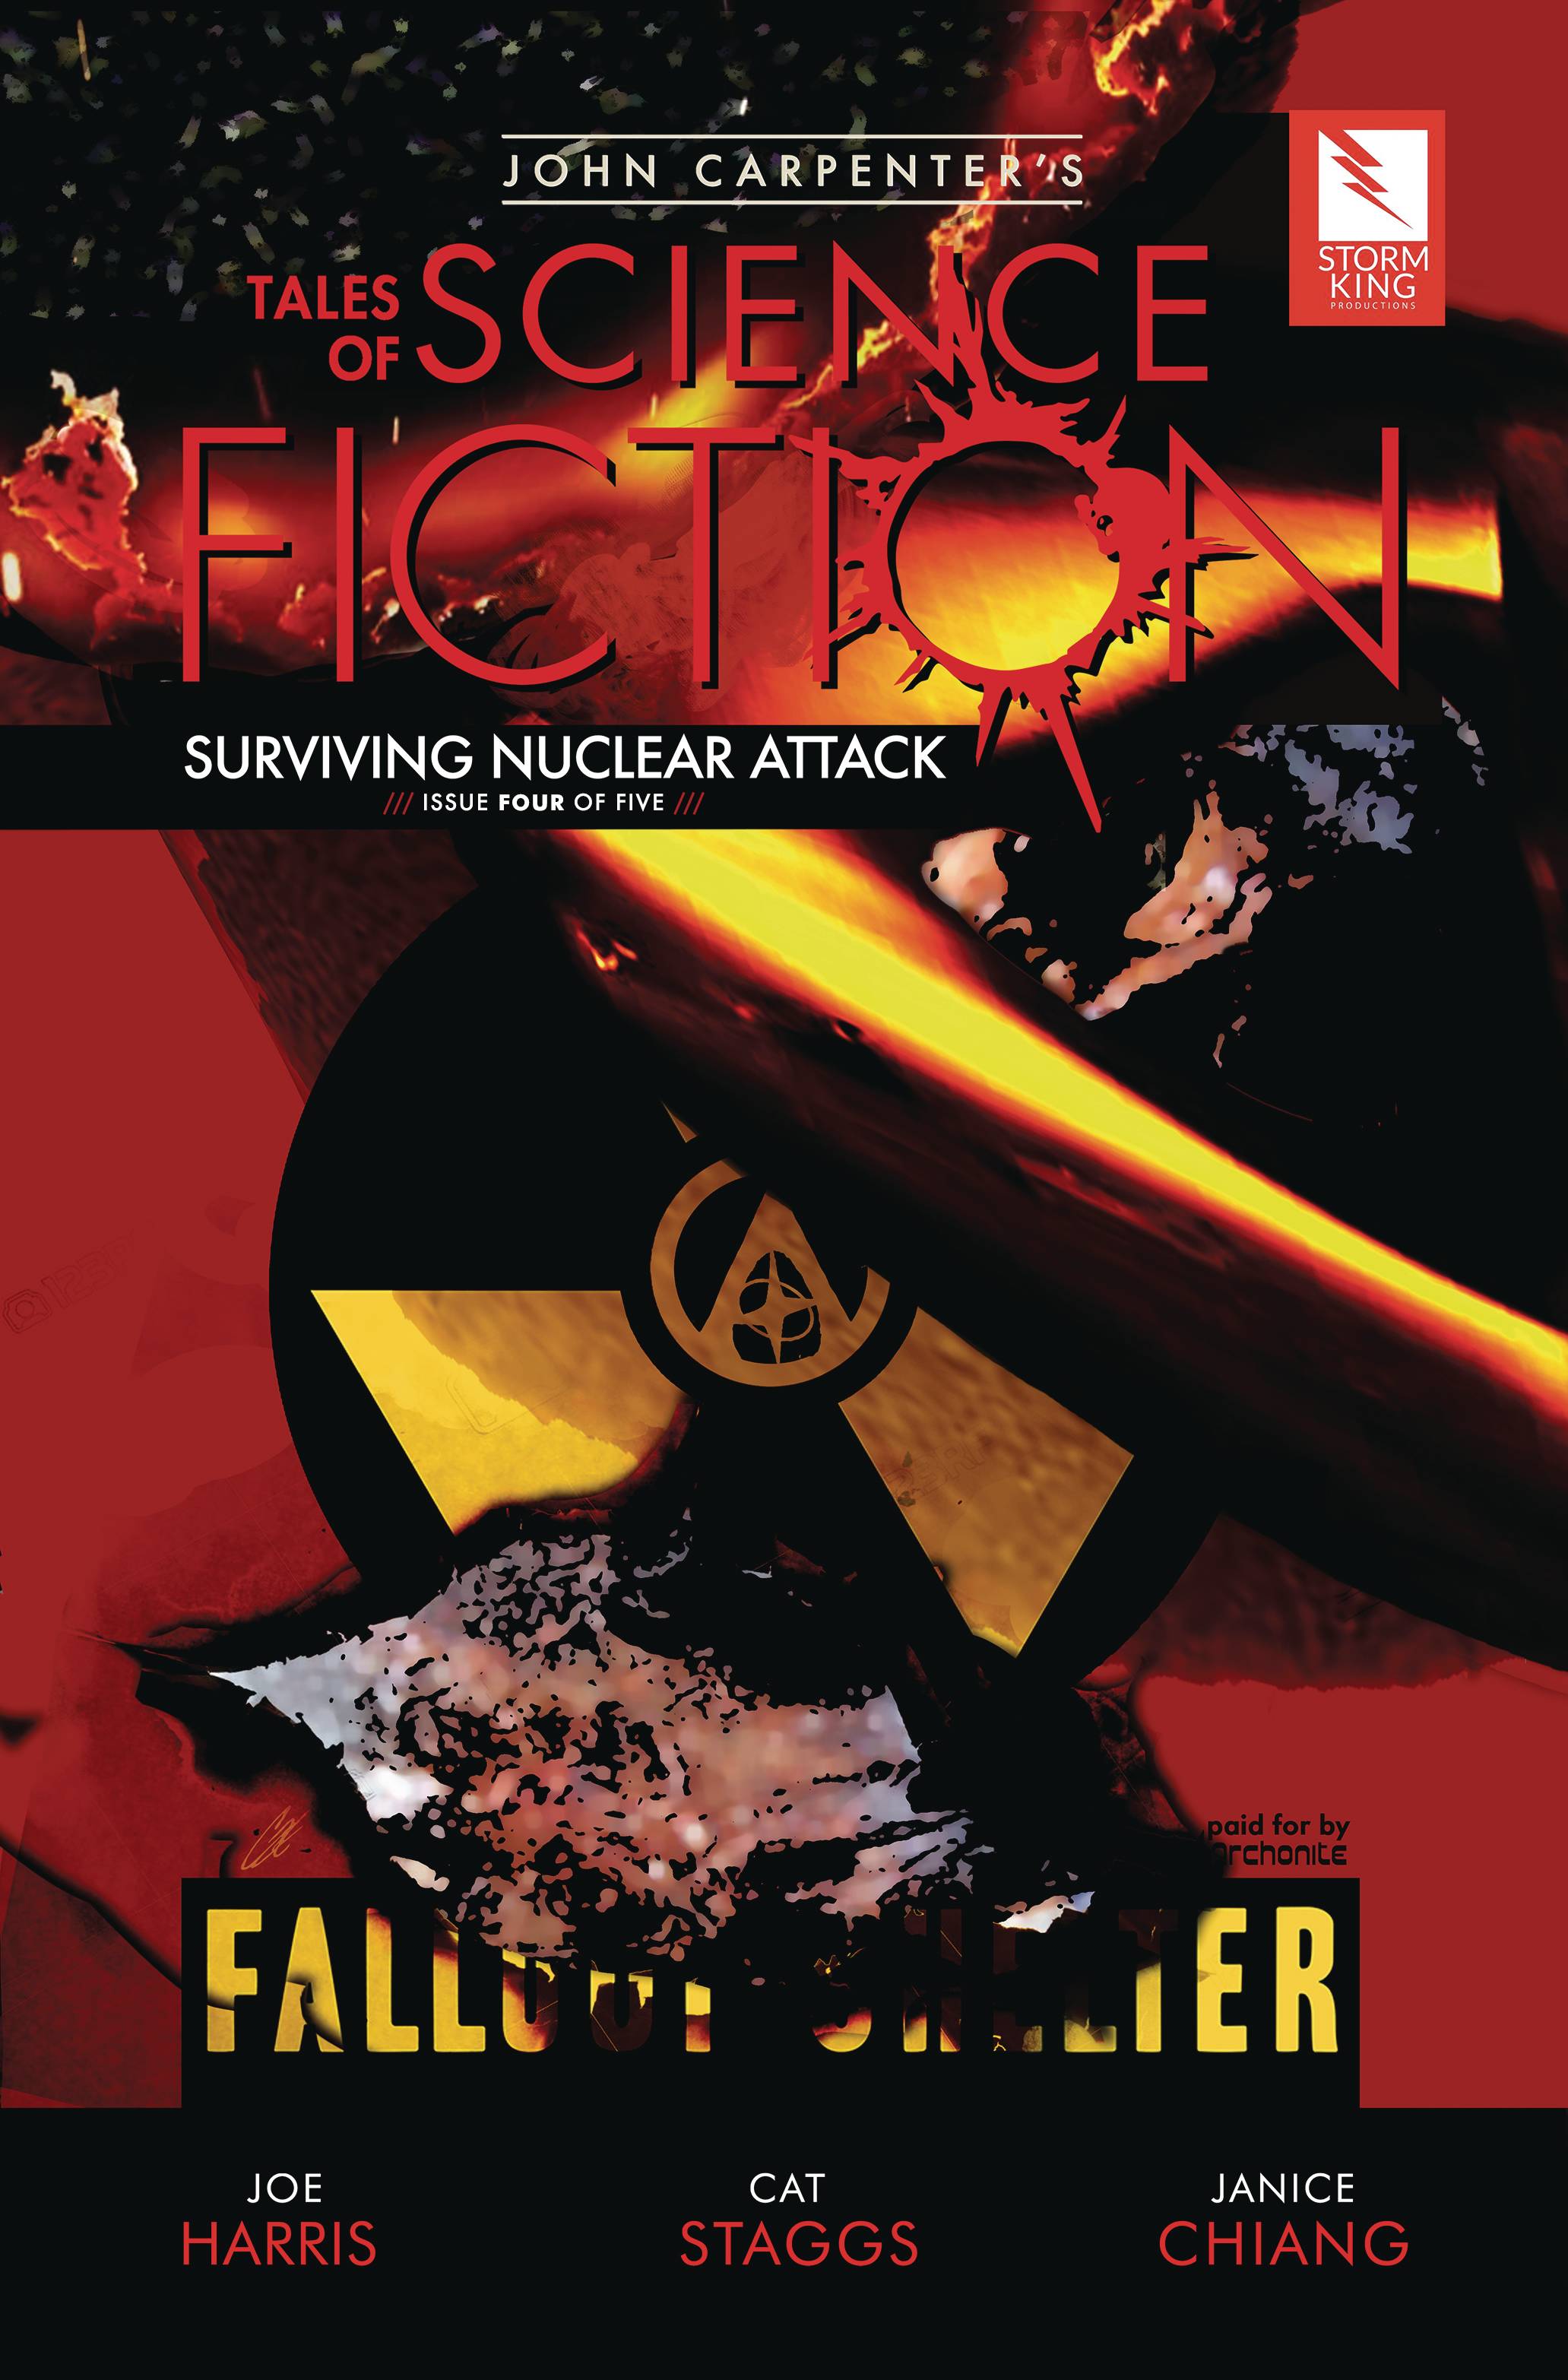 John Carpenter's Tales of Science Fiction: Surviving Nuclear Attack #4 (2019)